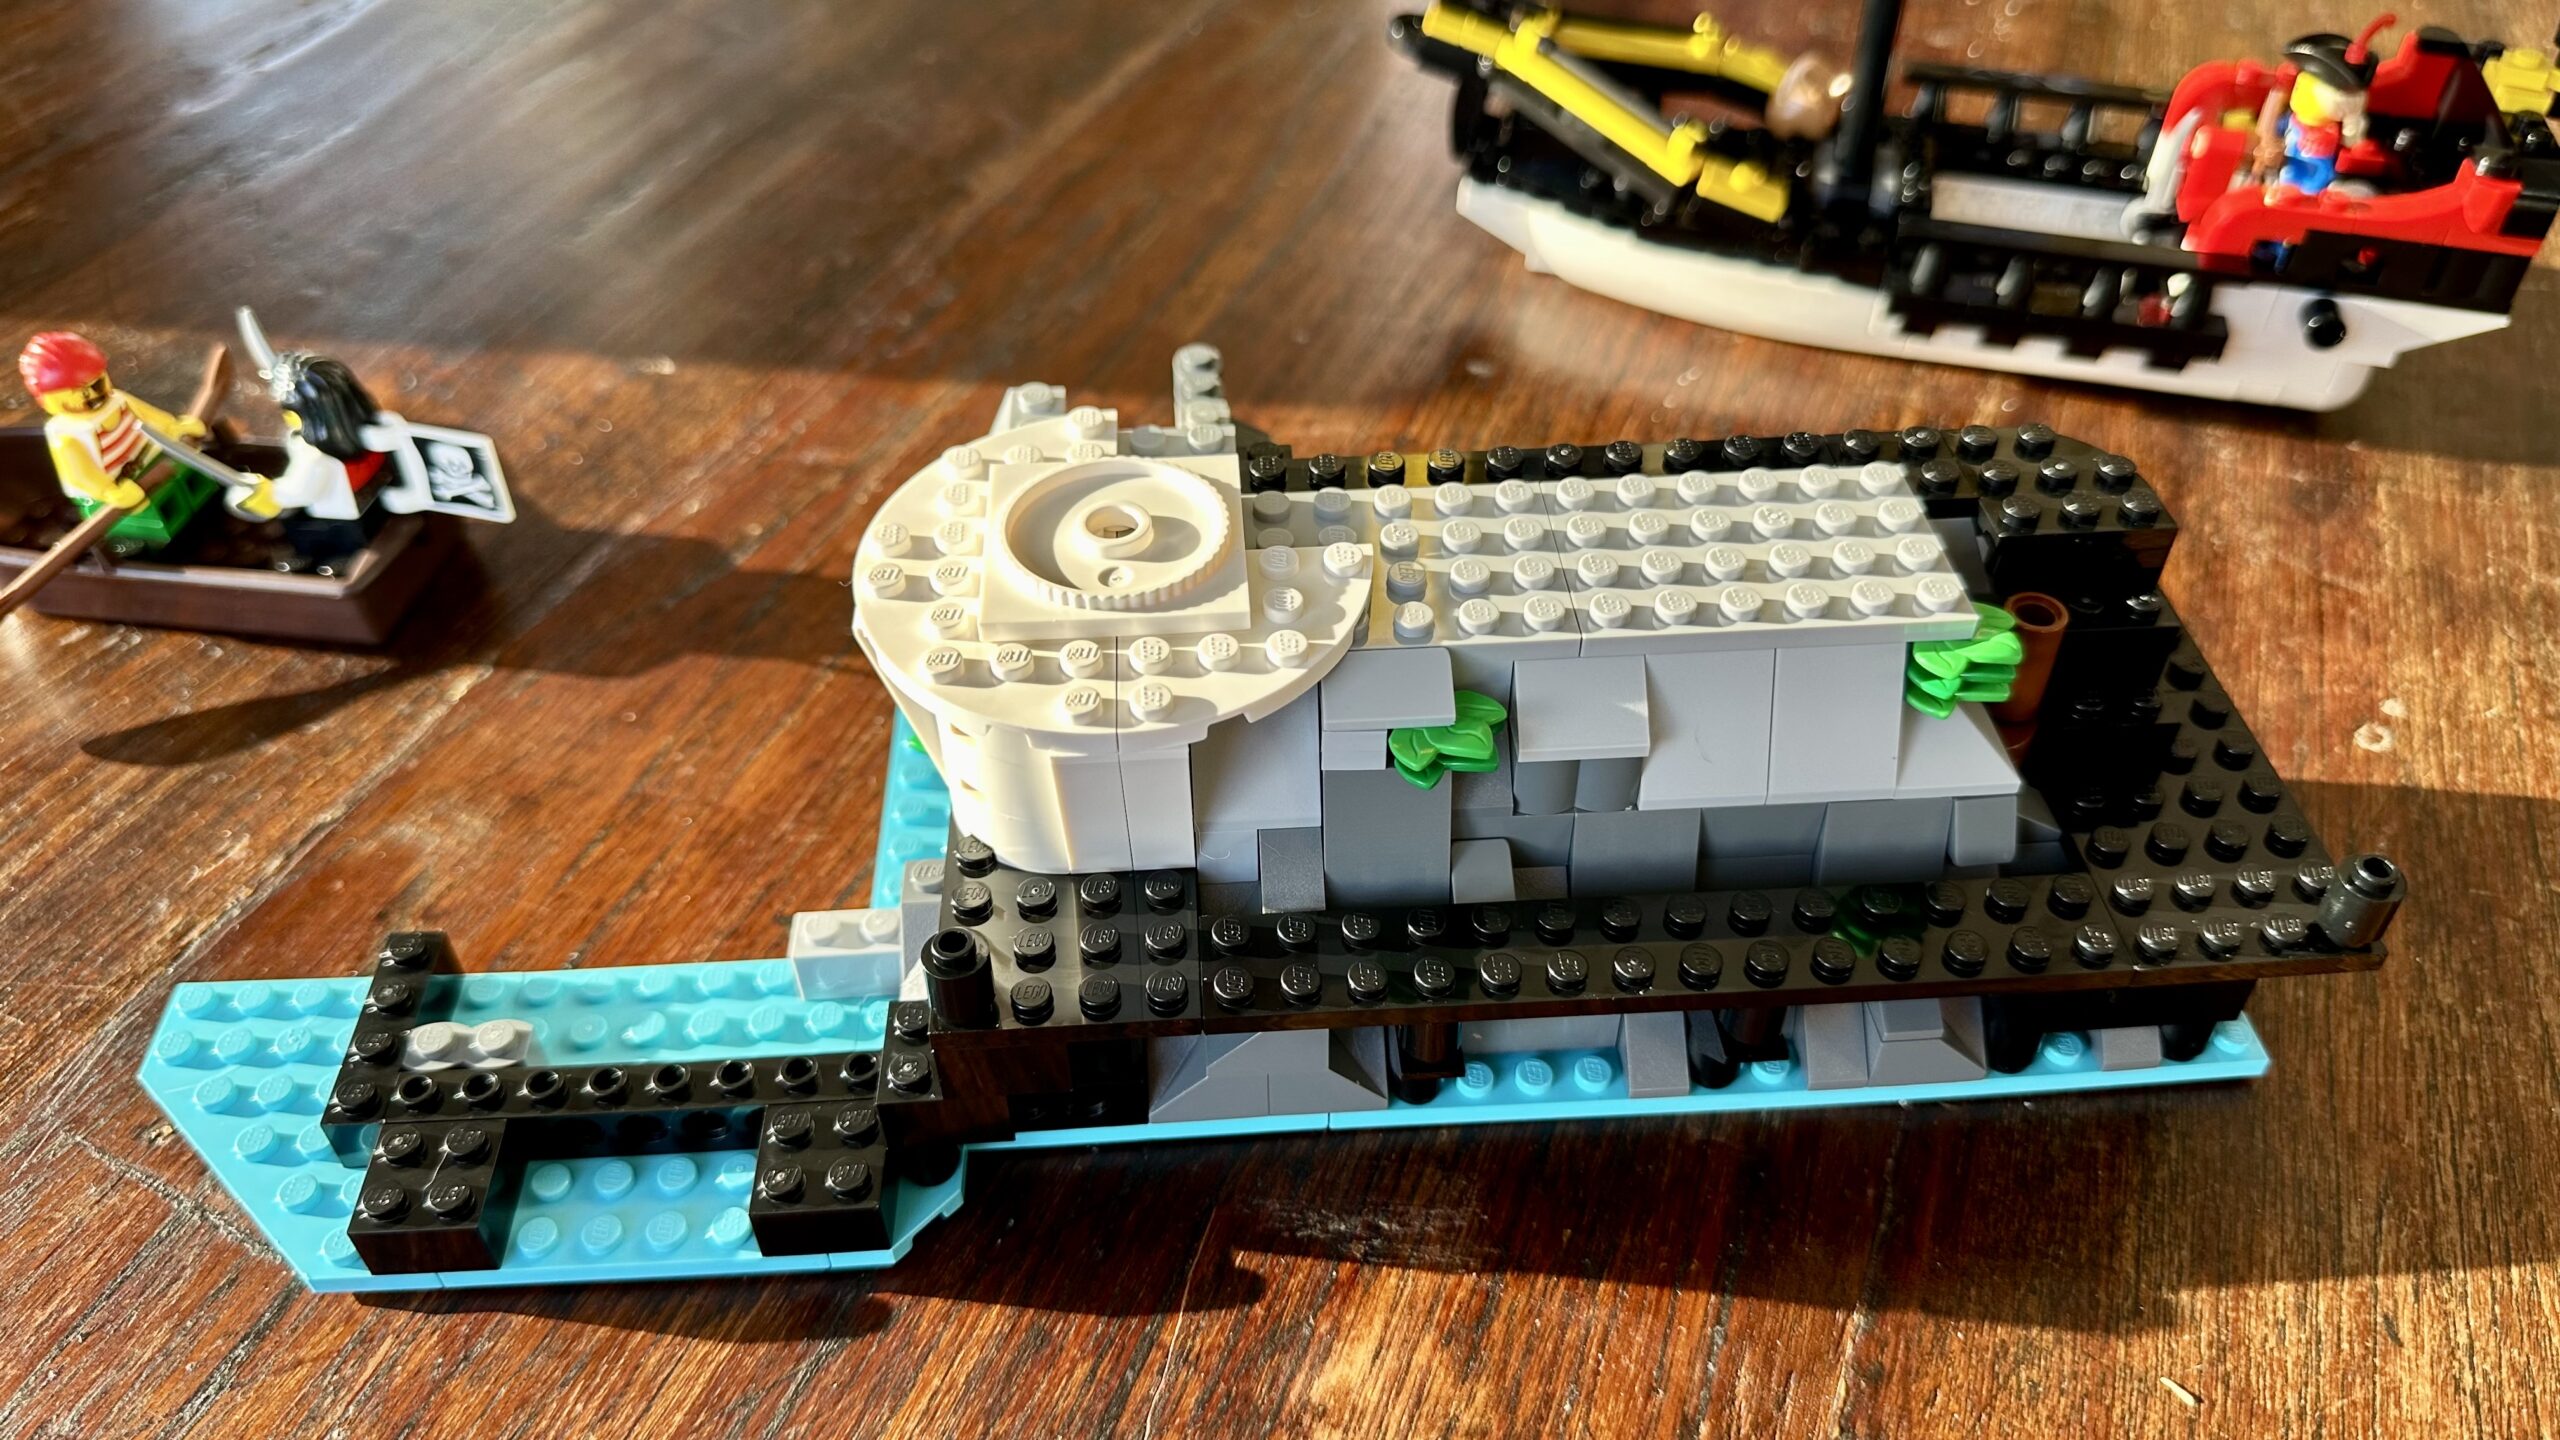 LEGO build in progress. Turquoise waters, black jetty, darkand light  gray craggy rocks, and some white brick foundations. A few green leaves peek out amongst the rocks.